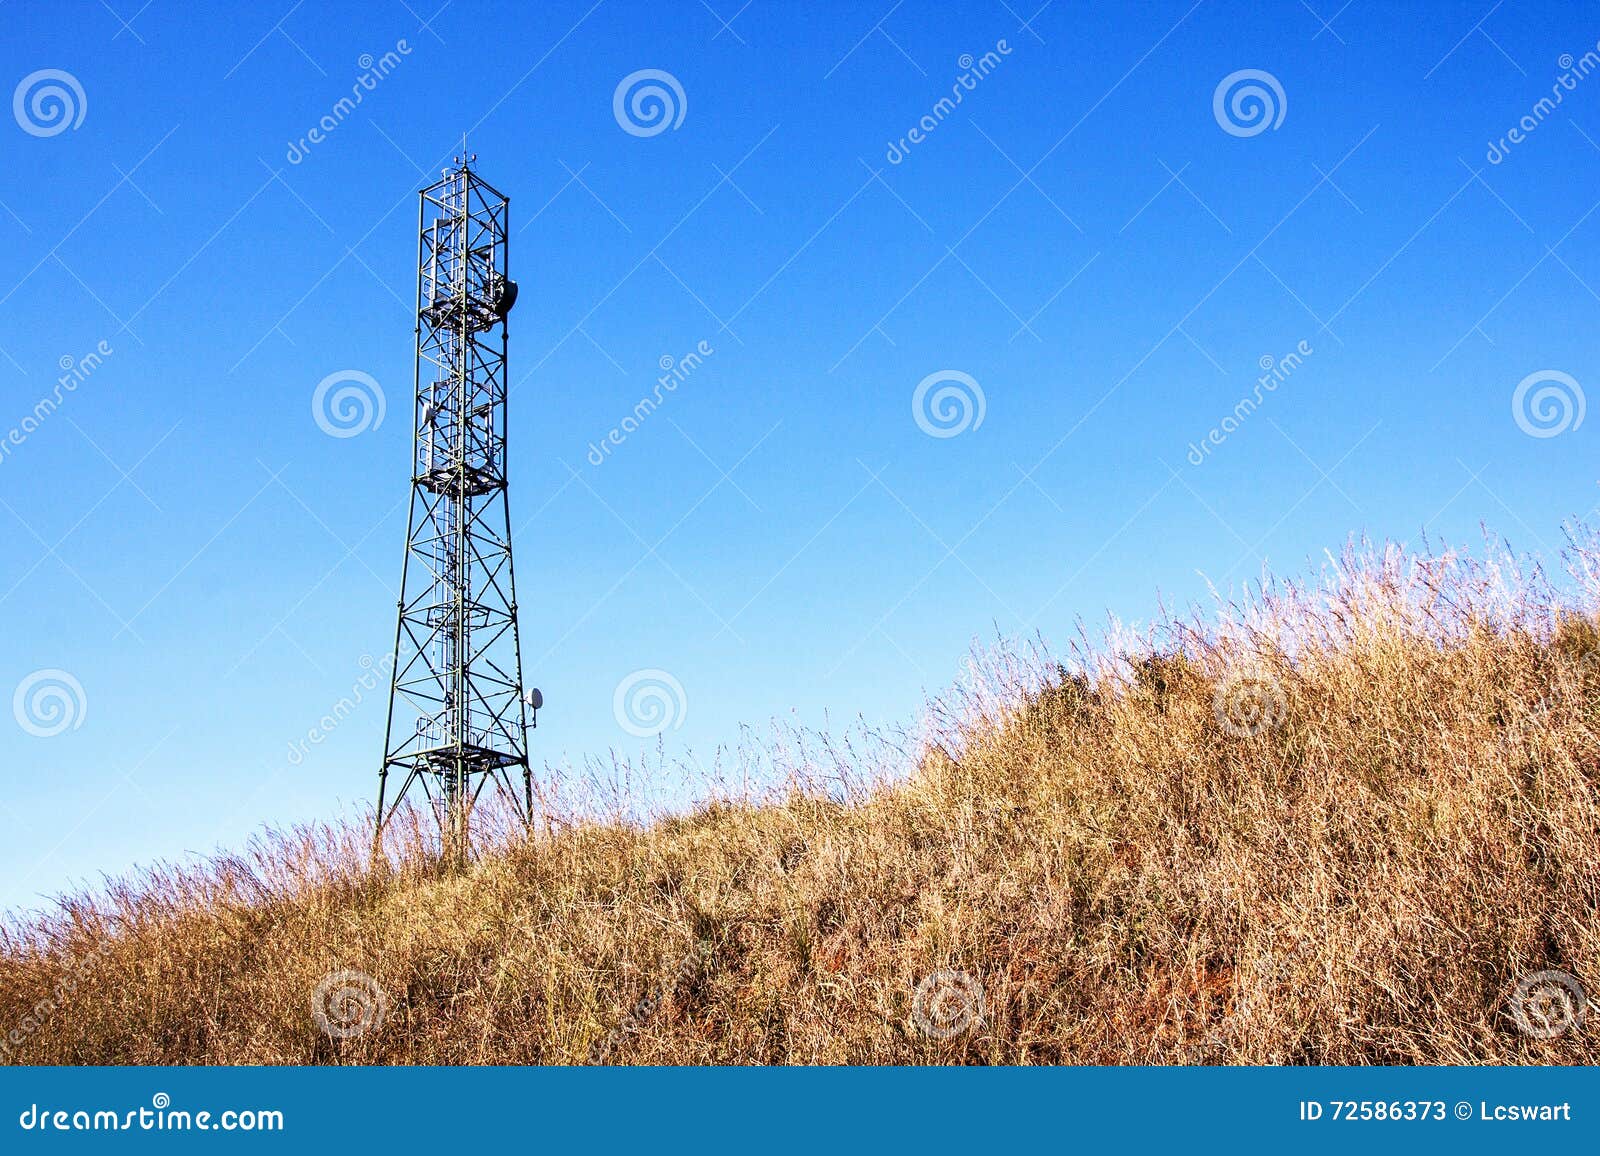 dry winter grass and comunication tower against blue sky